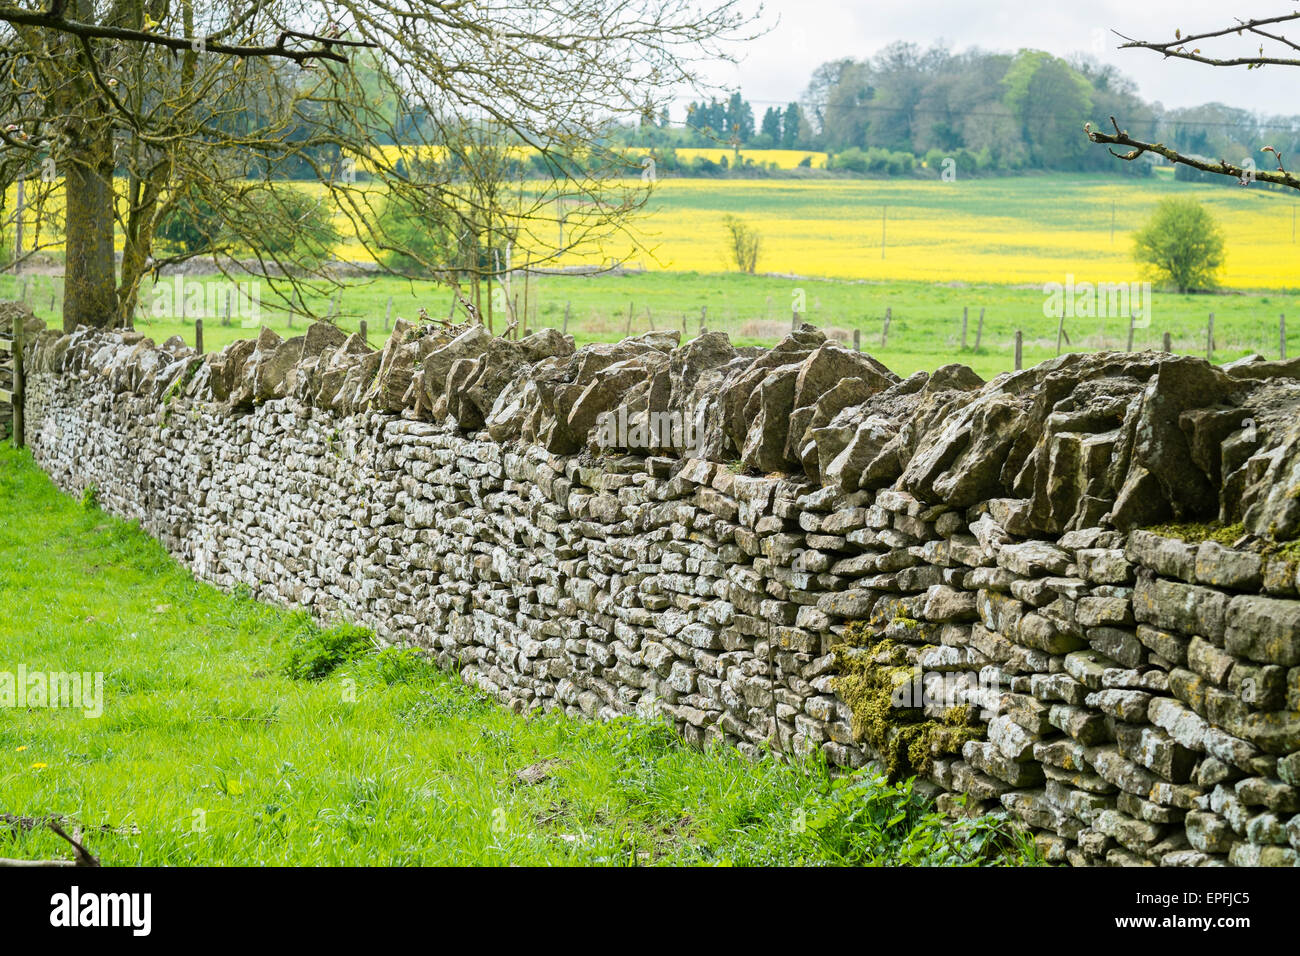 A well-maintained Typical Cotswold-style dry stone wall around a field on the outskirts of Cirencester, Gloucestershire, England UK Stock Photo